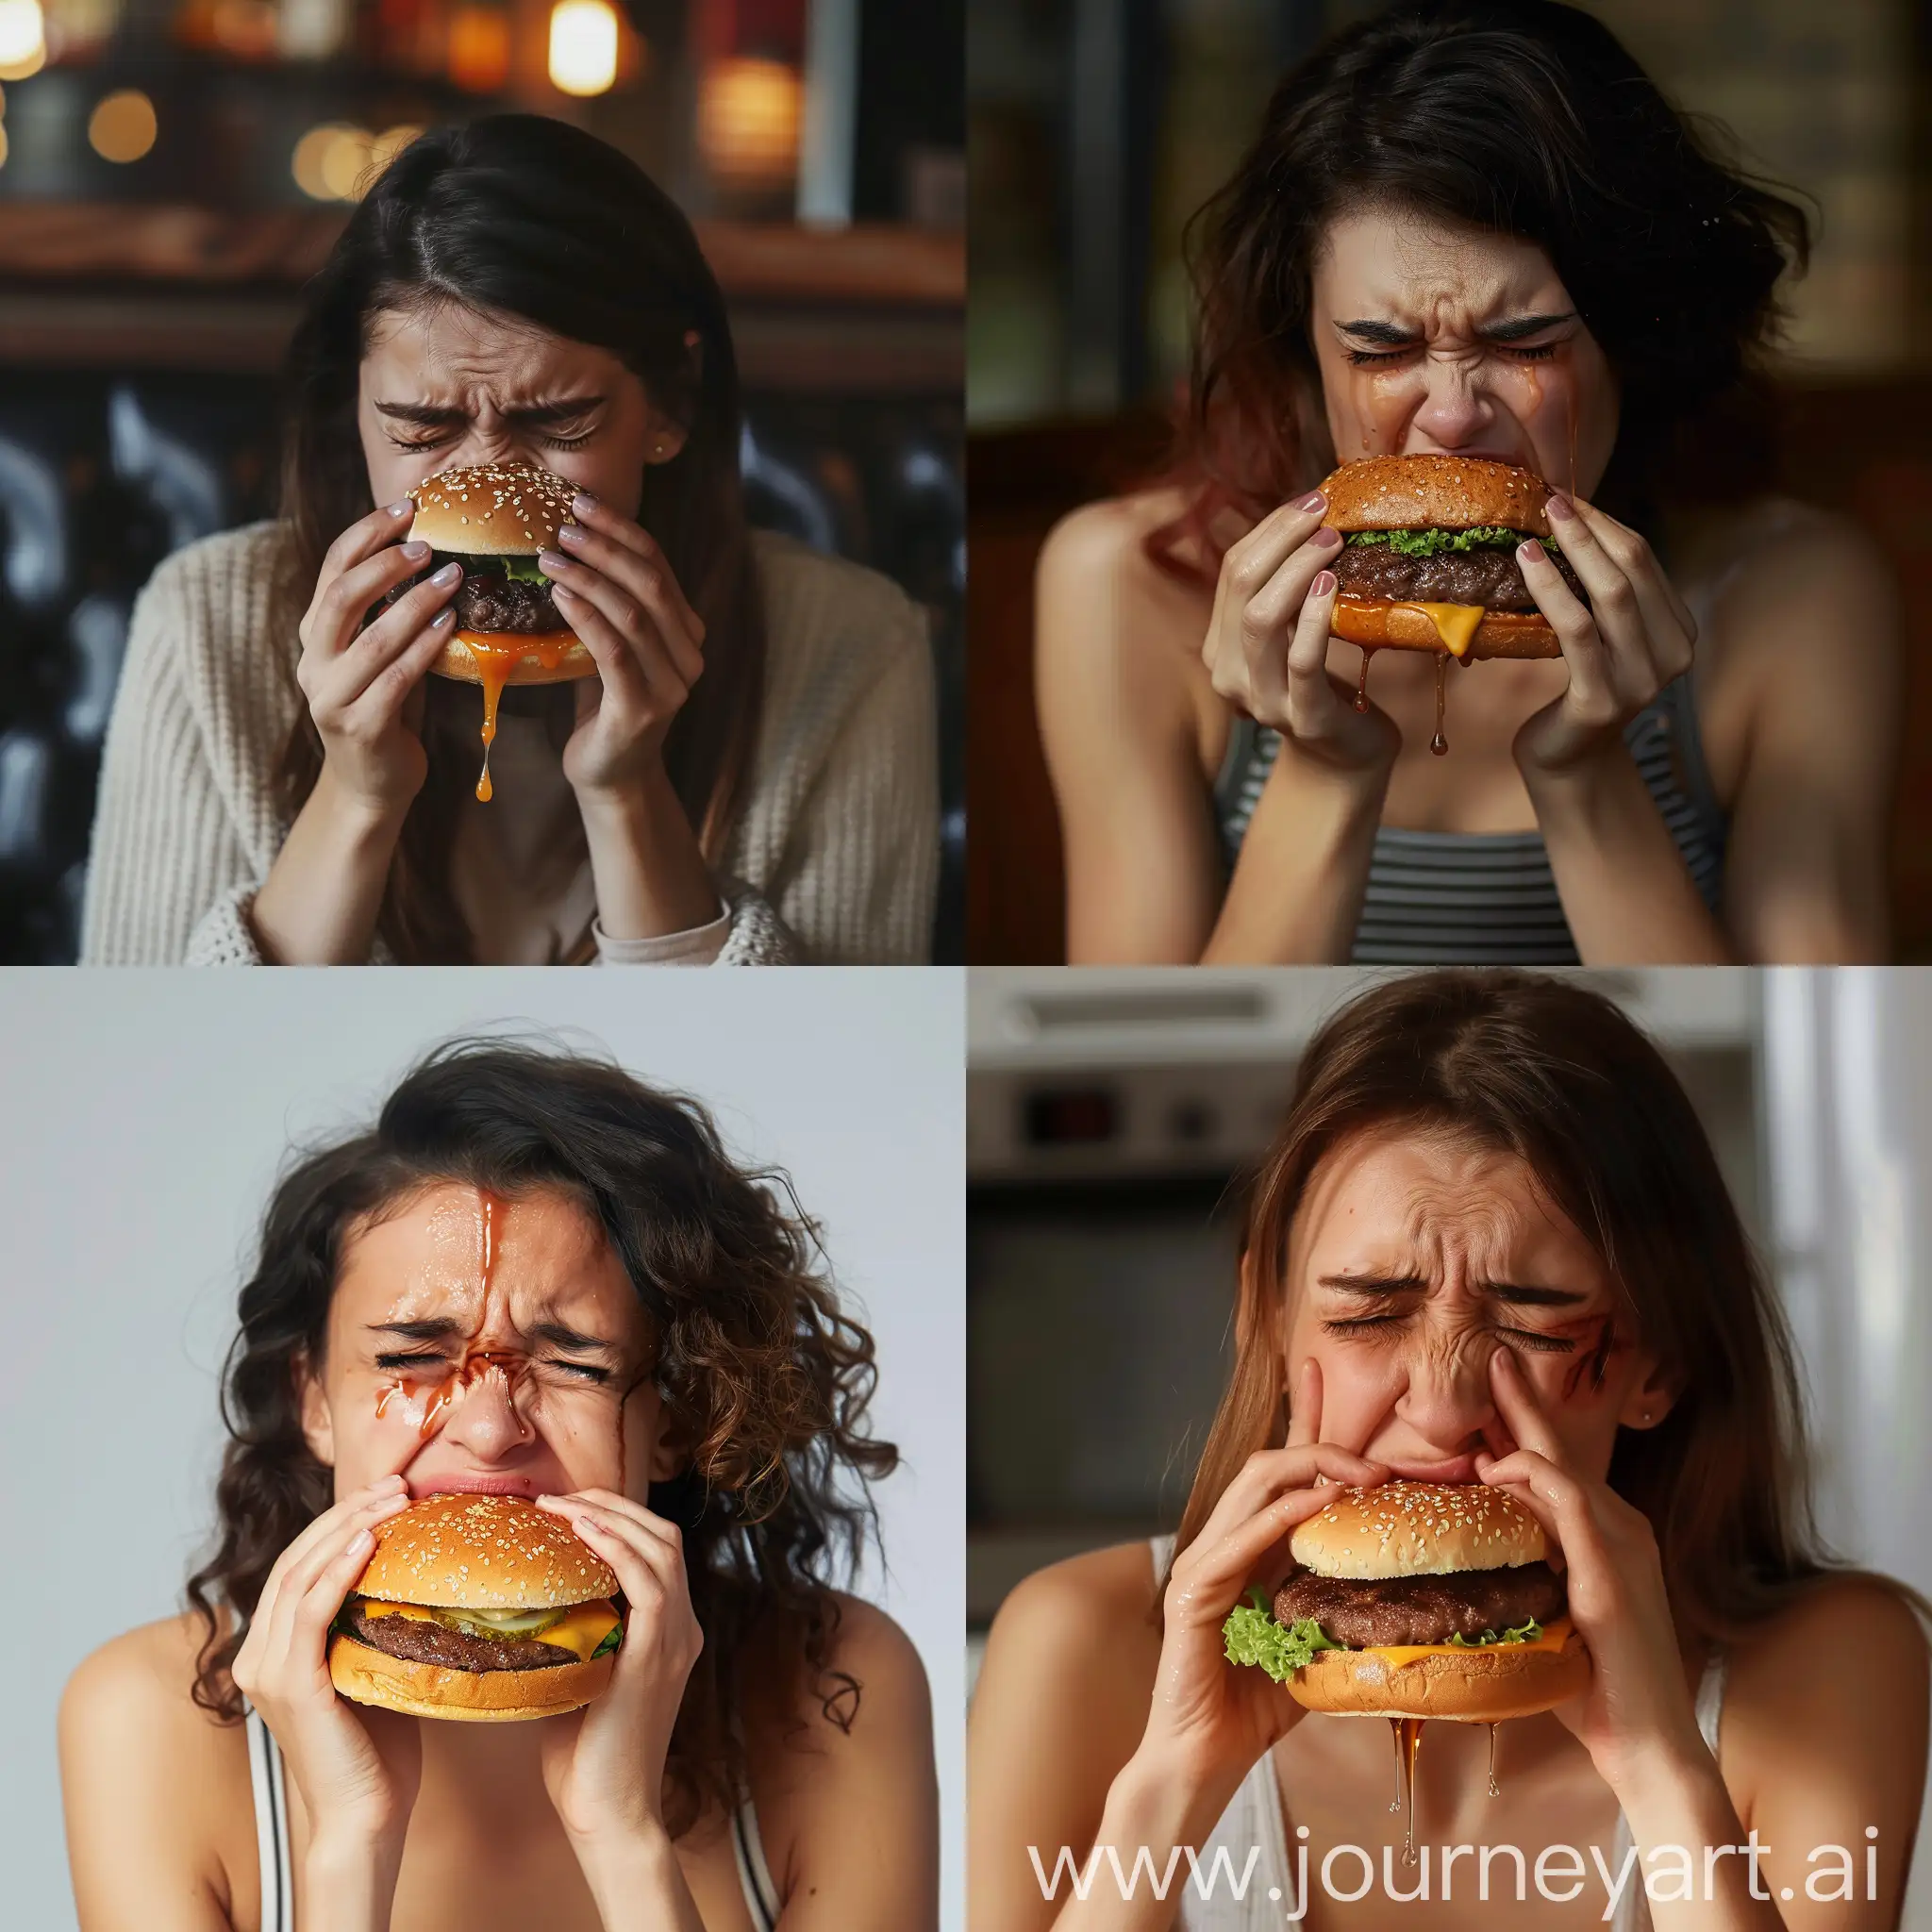 A young woman who eats a dripping mburger while she's crying 